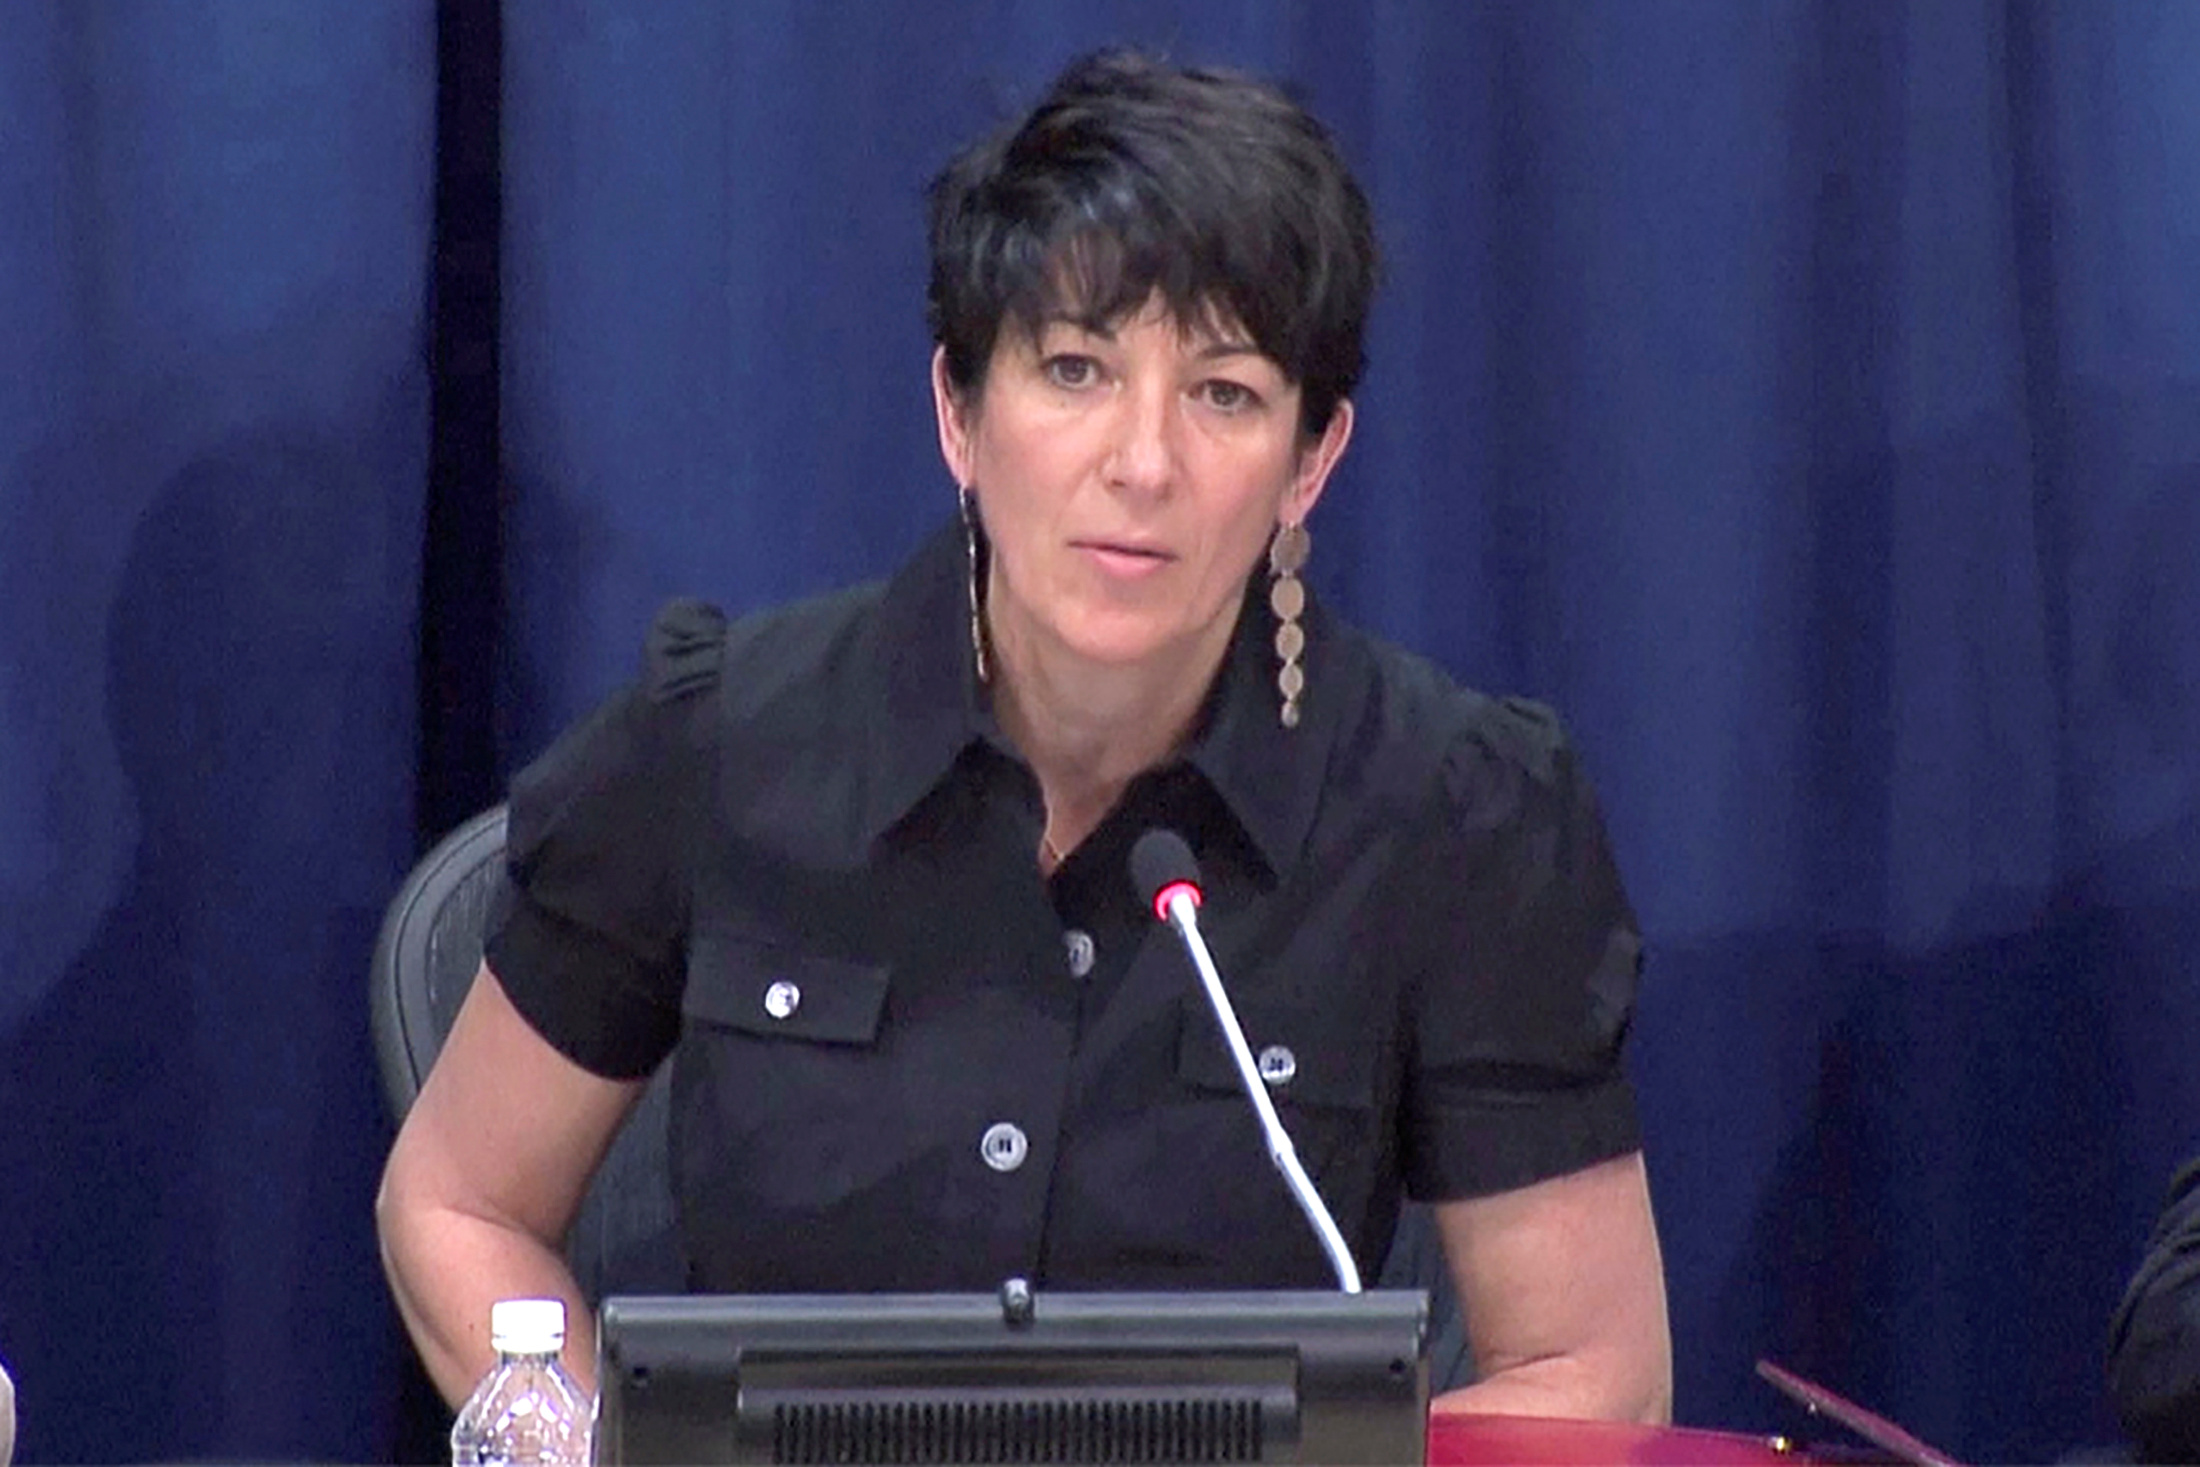 PHOTO: Ghislaine Maxwell, longtime associate of accused sex trafficker Jeffrey Epstein, speaks at a news conference on oceans and sustainable development at the United Nations in New York, June 25, 2013.